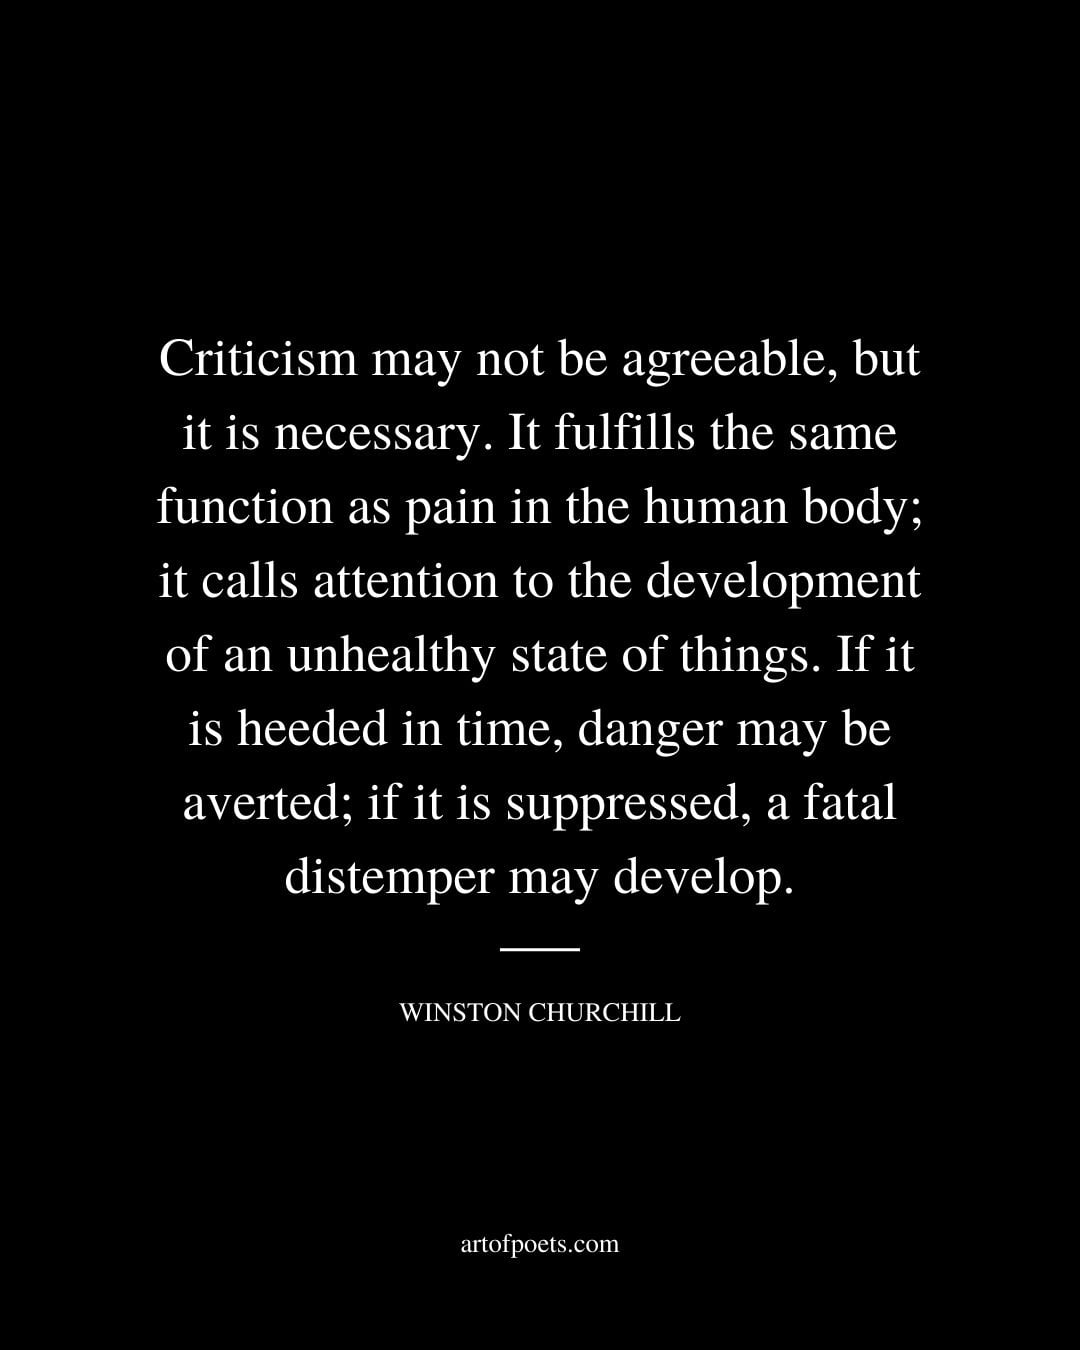 Criticism may not be agreeable but it is necessary. It fulfills the same function as pain in the human body